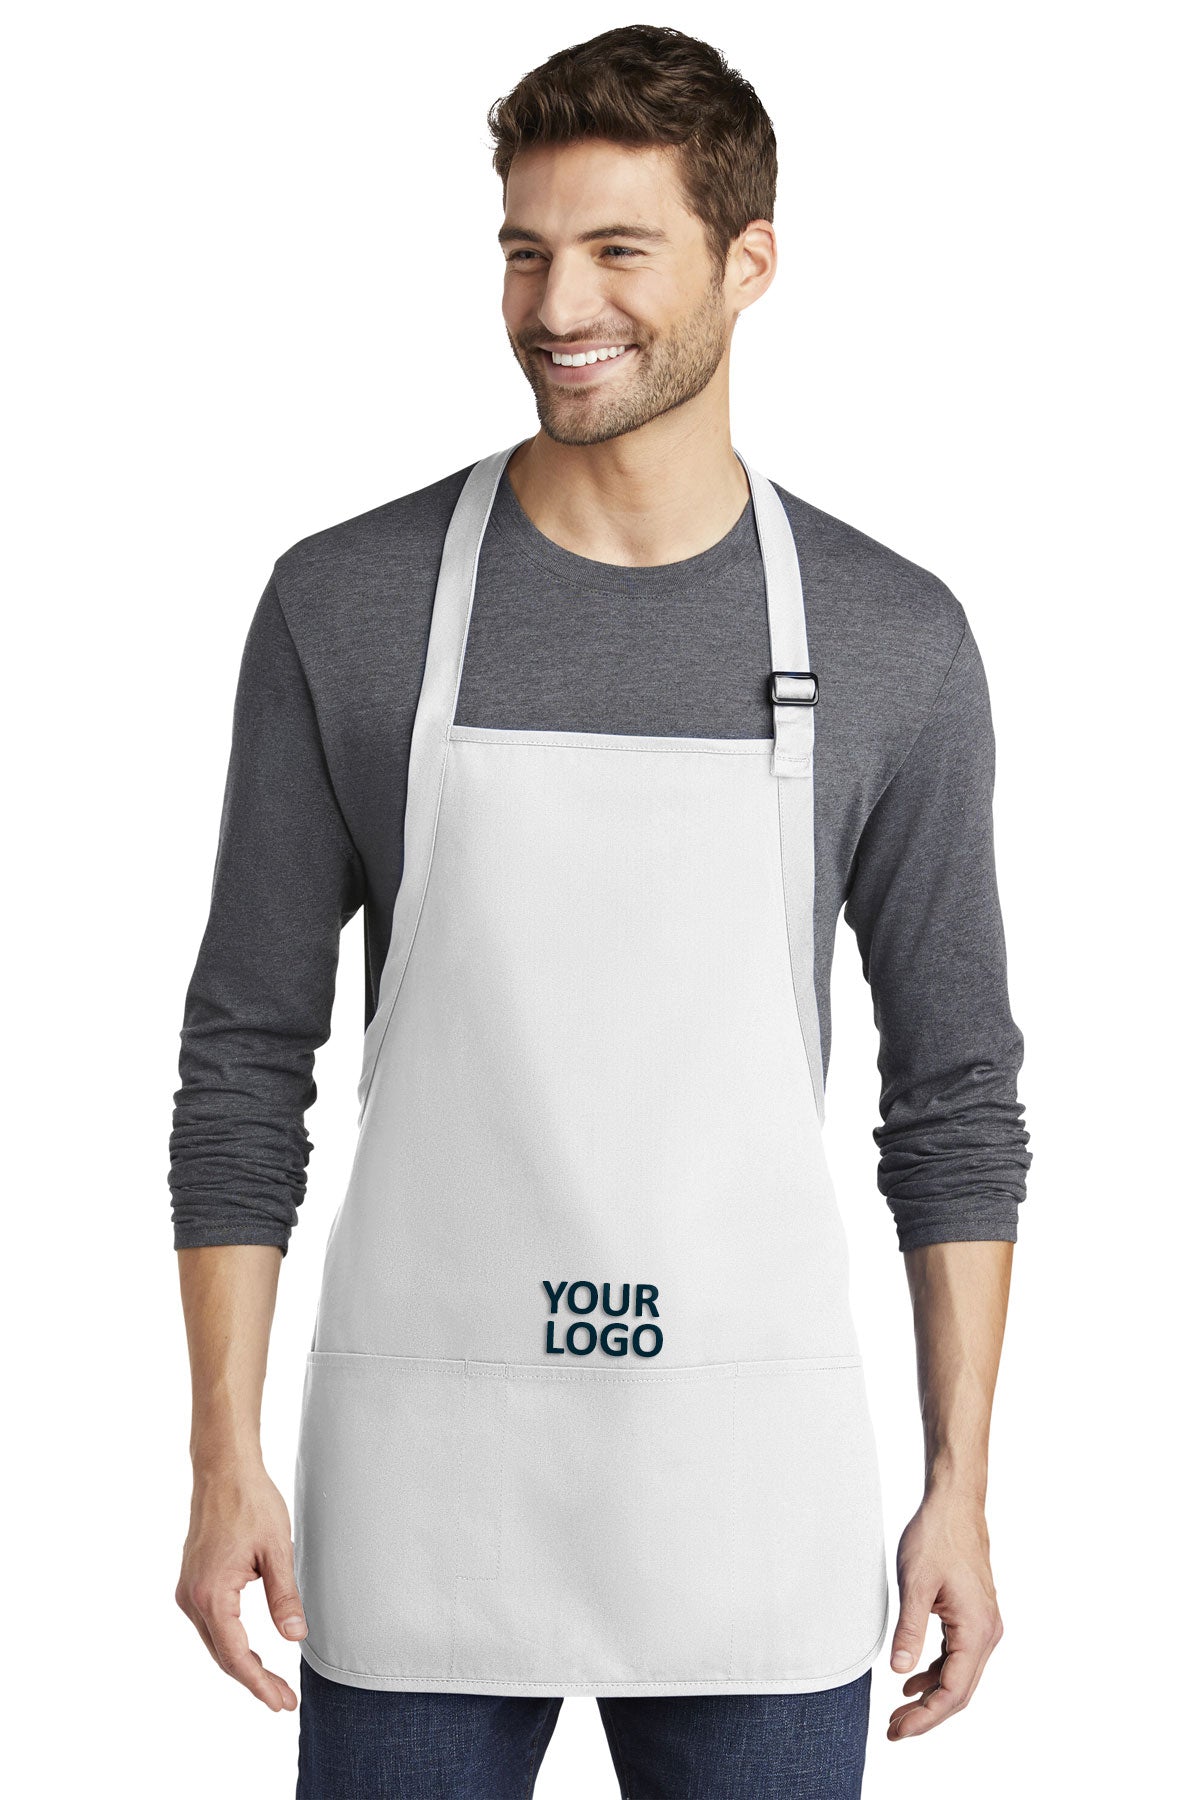 Port Authority Medium-Length Apron with Pouch Pockets A510 White